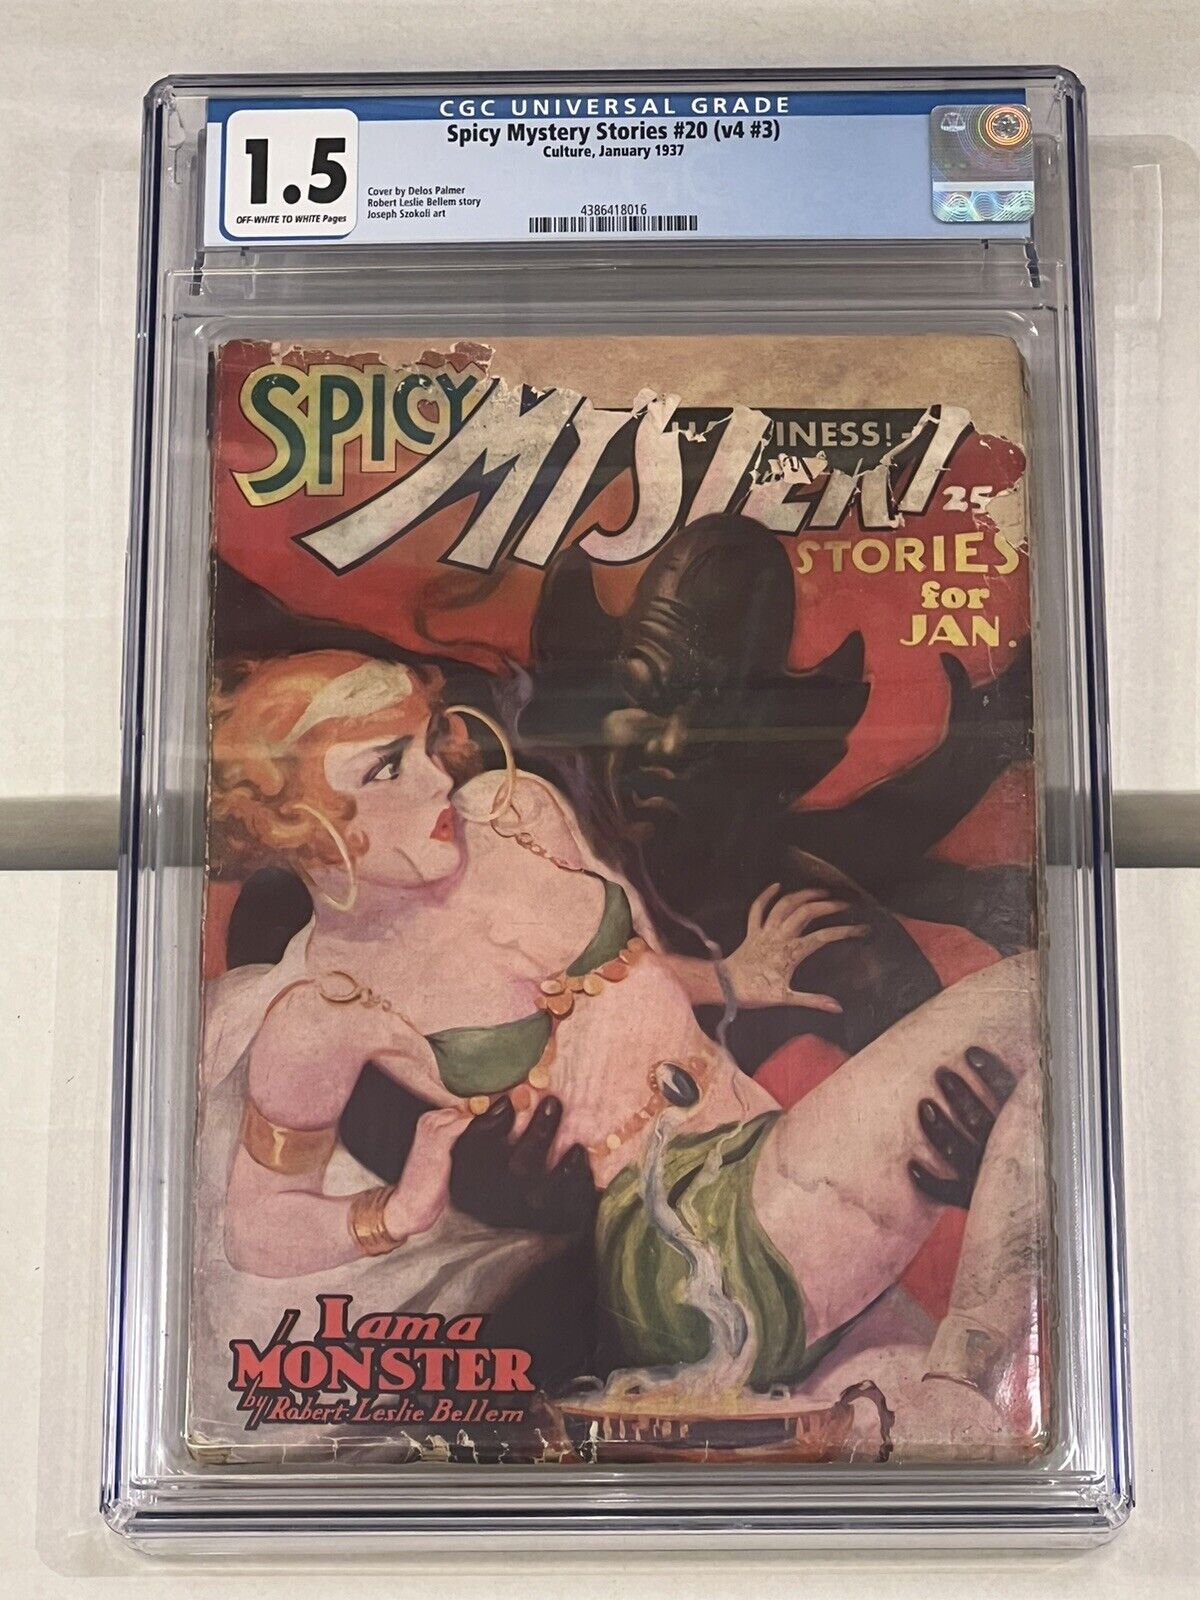 Spicy Mystery Stories January 1937 CGC 1.5 Pulp